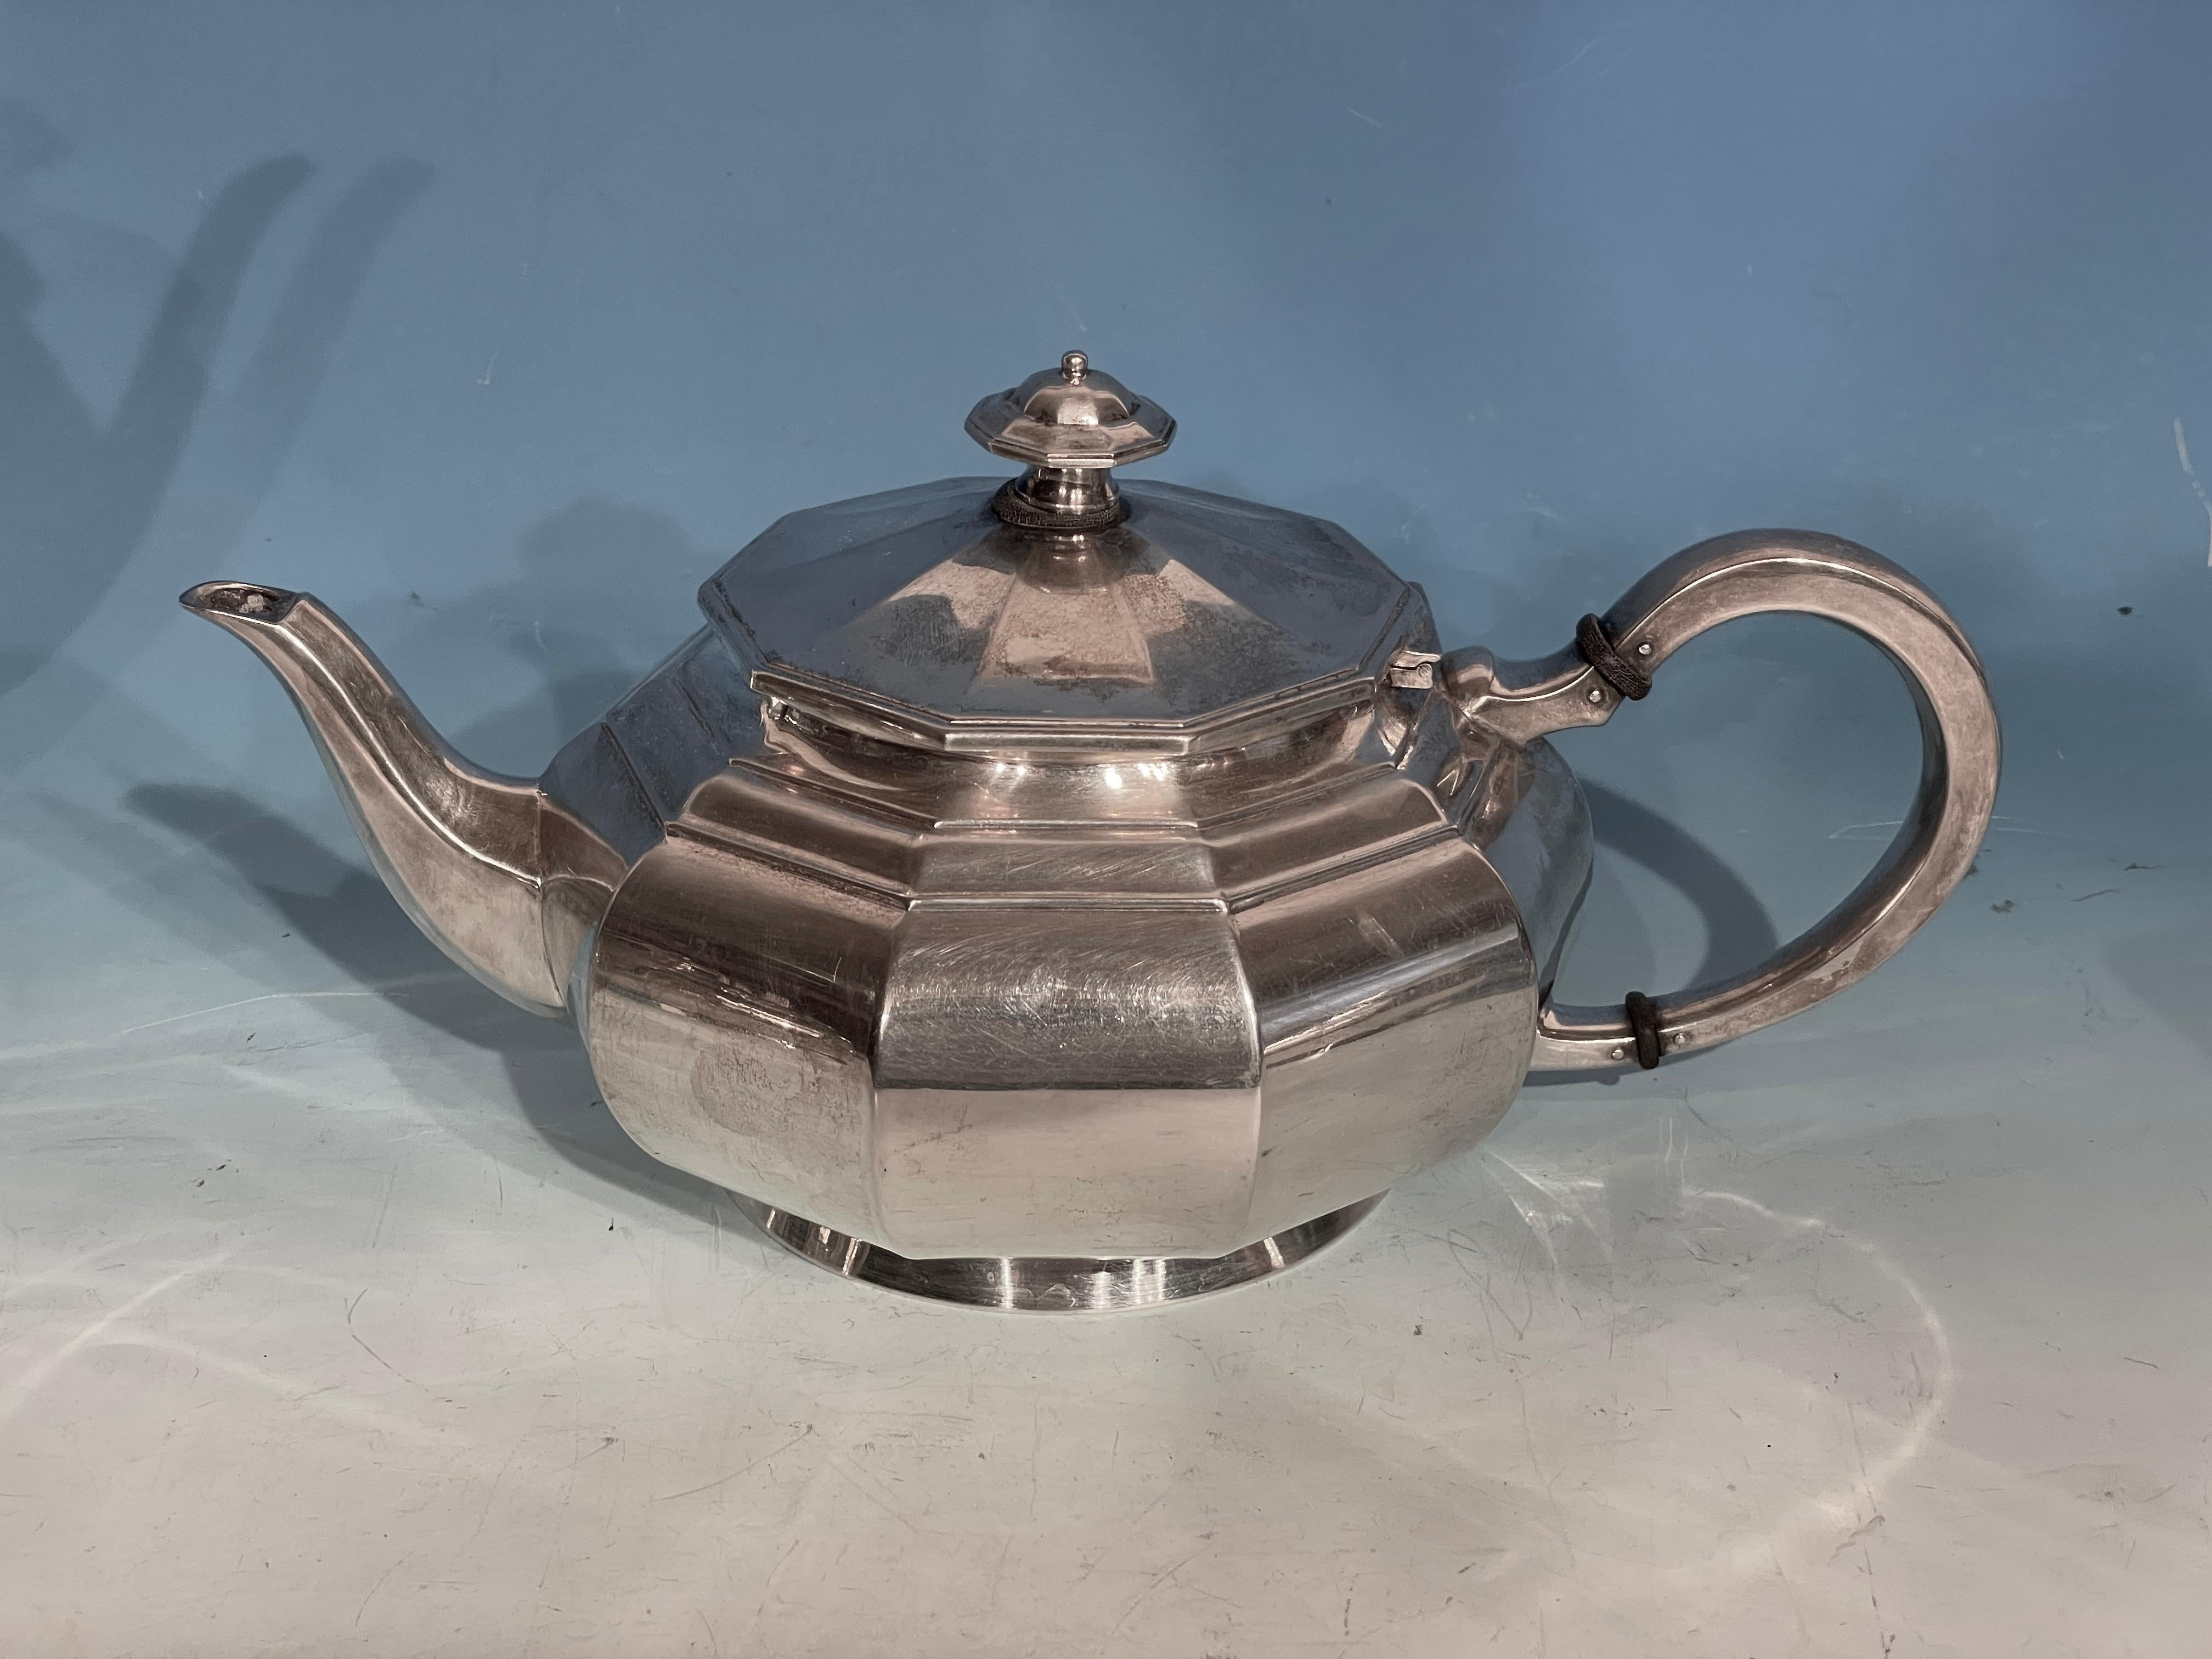 Coffee and tea set silver, Germany 1900-20. 
This pretty coffee and tea set stands out for its geometric design of the early 20th century. The silver marks identify it as a German piece with a millesimal fineness of 835. 
Size of the tea pot: H: